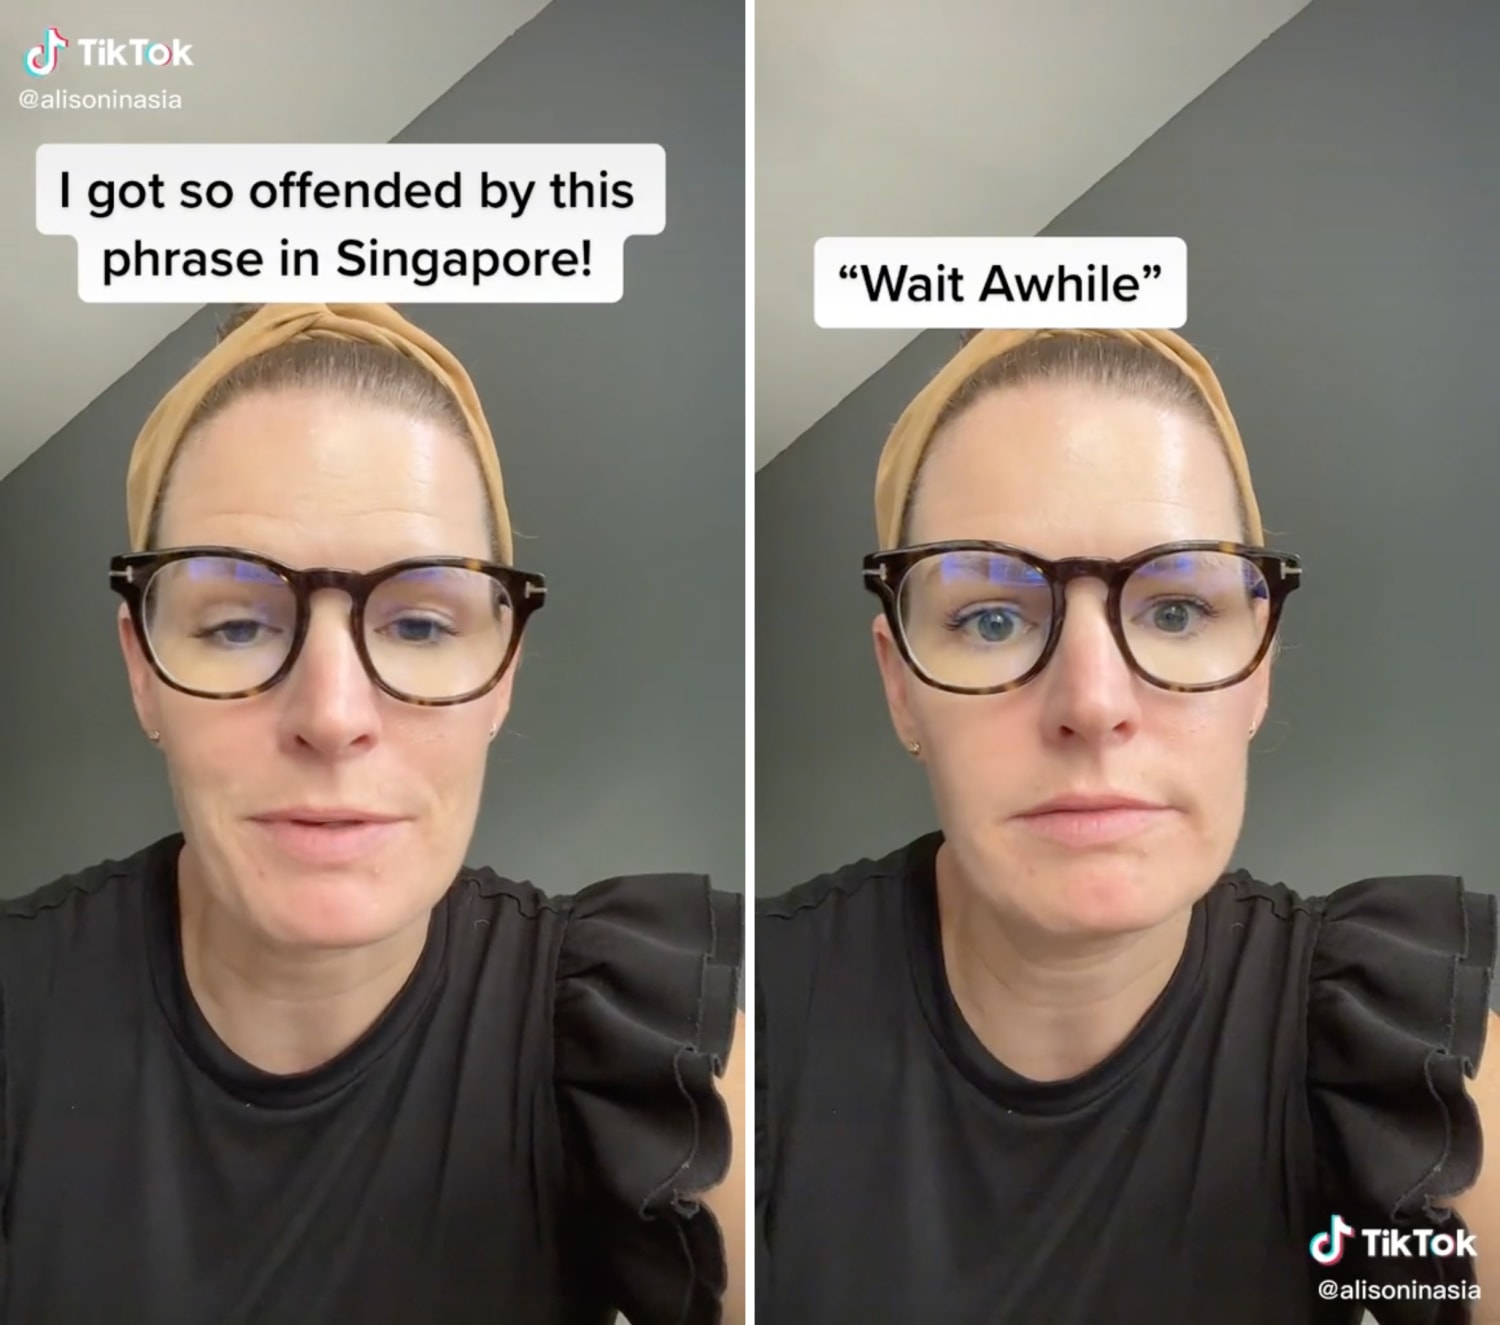 An American expatriate in Singapore talked about why the phrase "wait awhile" initially offended her when someone said it to her here.